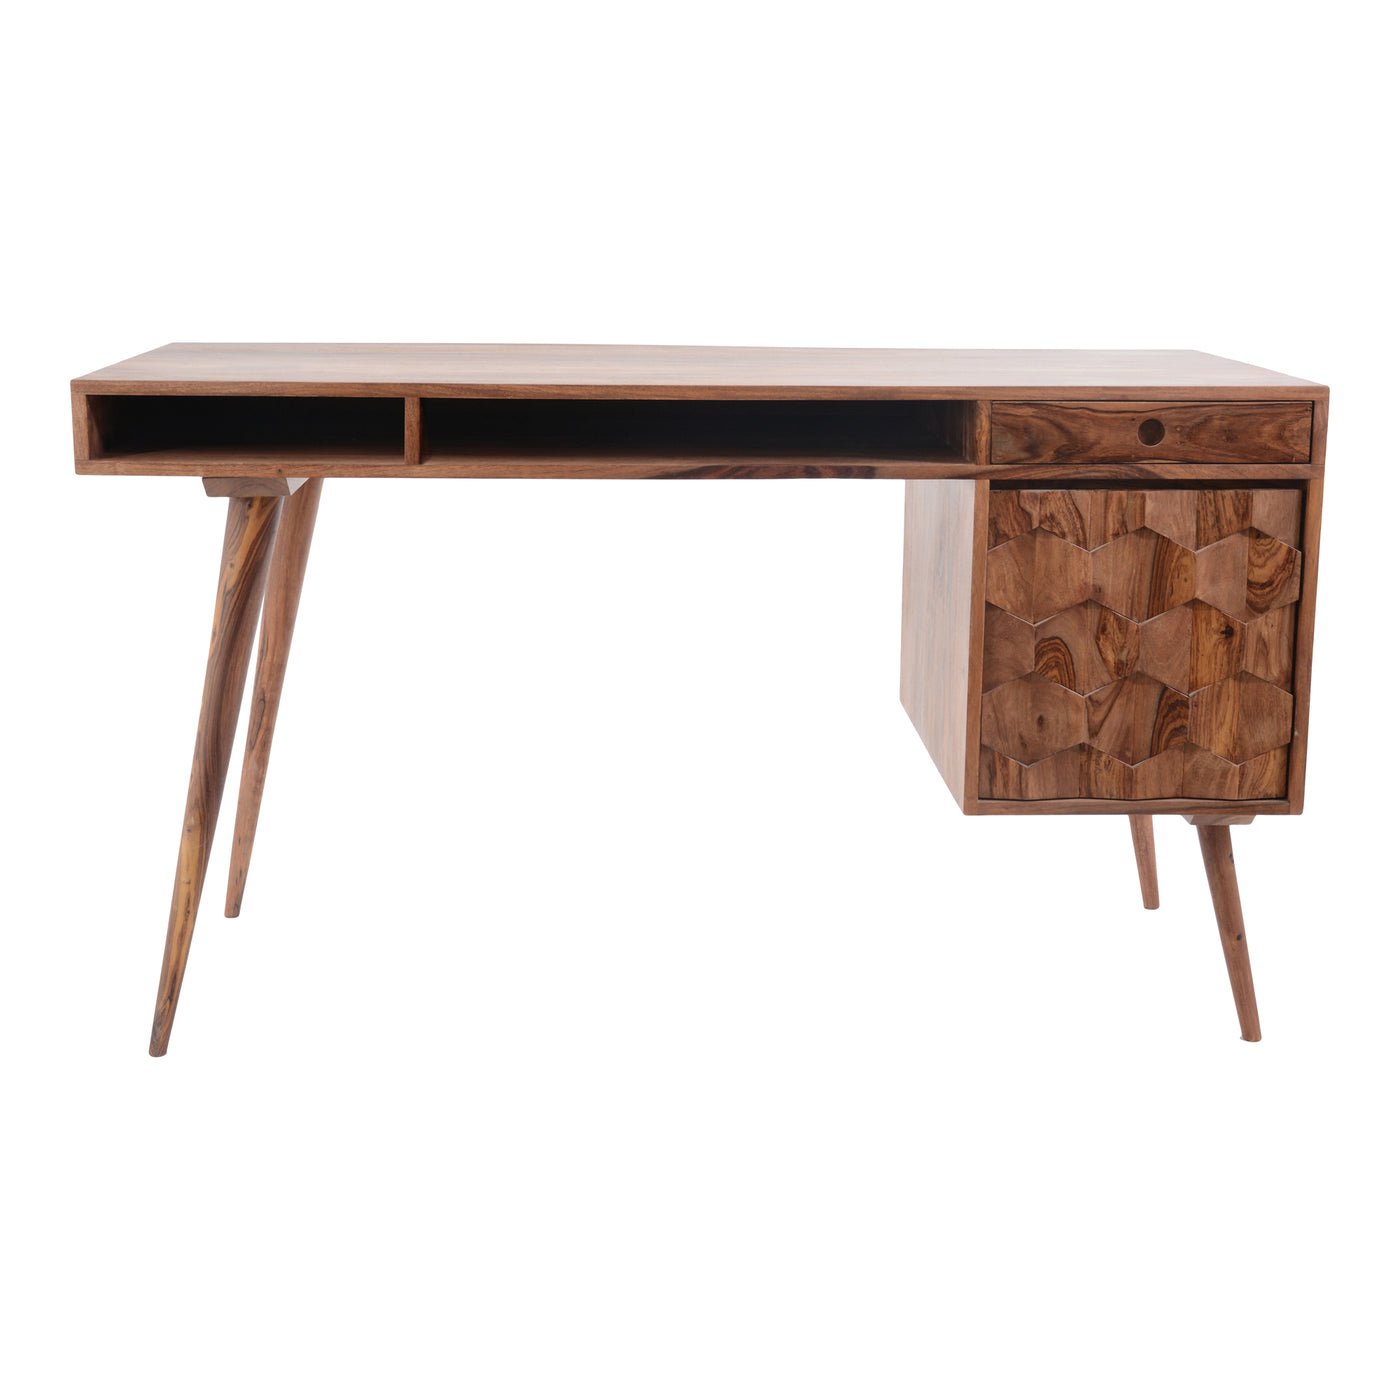 A home office essential. Made of solid Sheesham wood, this home office desk features an intricate wood pattern that height...